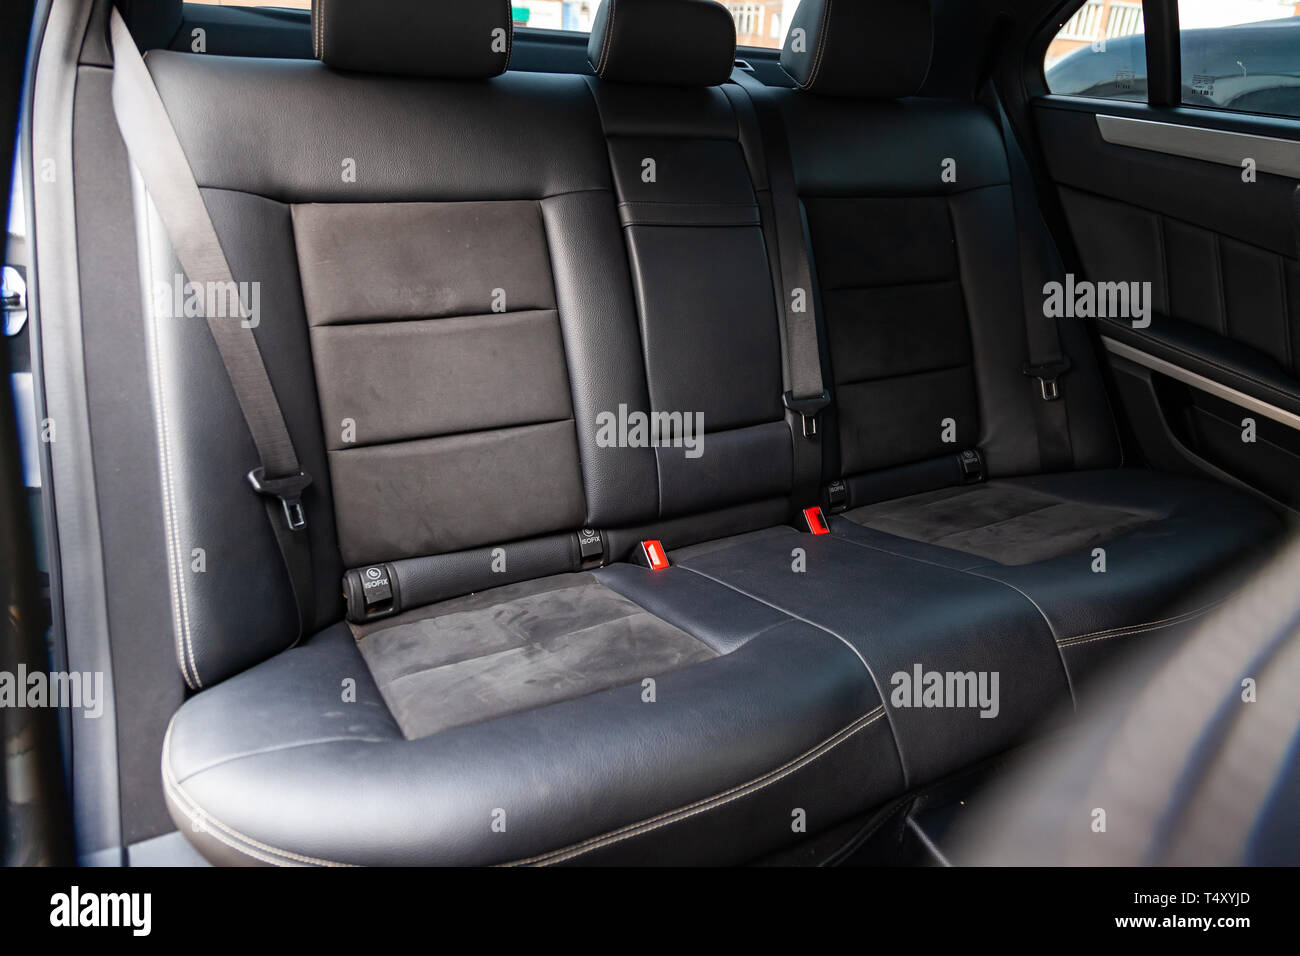 Novosibirsk, Russia - 04.12.2019: The interior of the car Mercedes Benz E-class E250 with a view of the rear seats with light gray trim Stock Photo